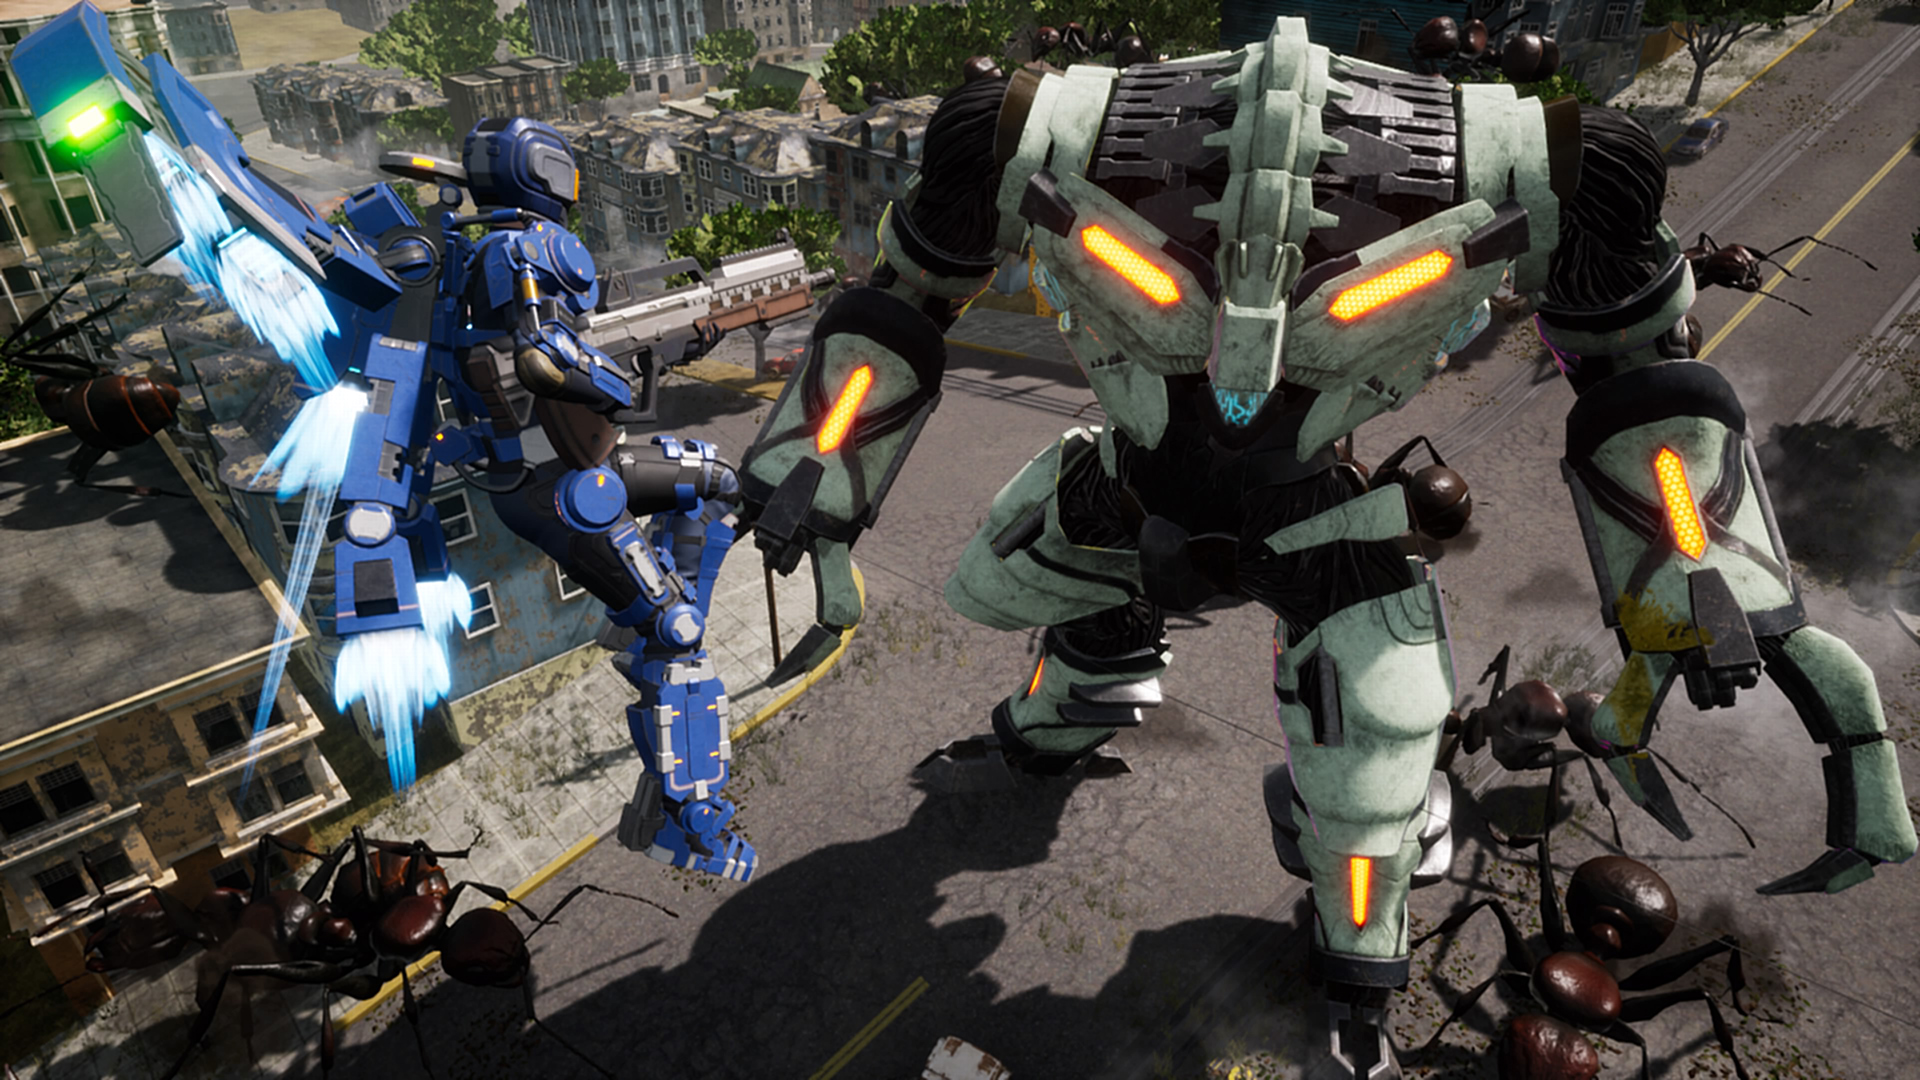 Preview: Earth Defense Force: Iron Rain Impressions